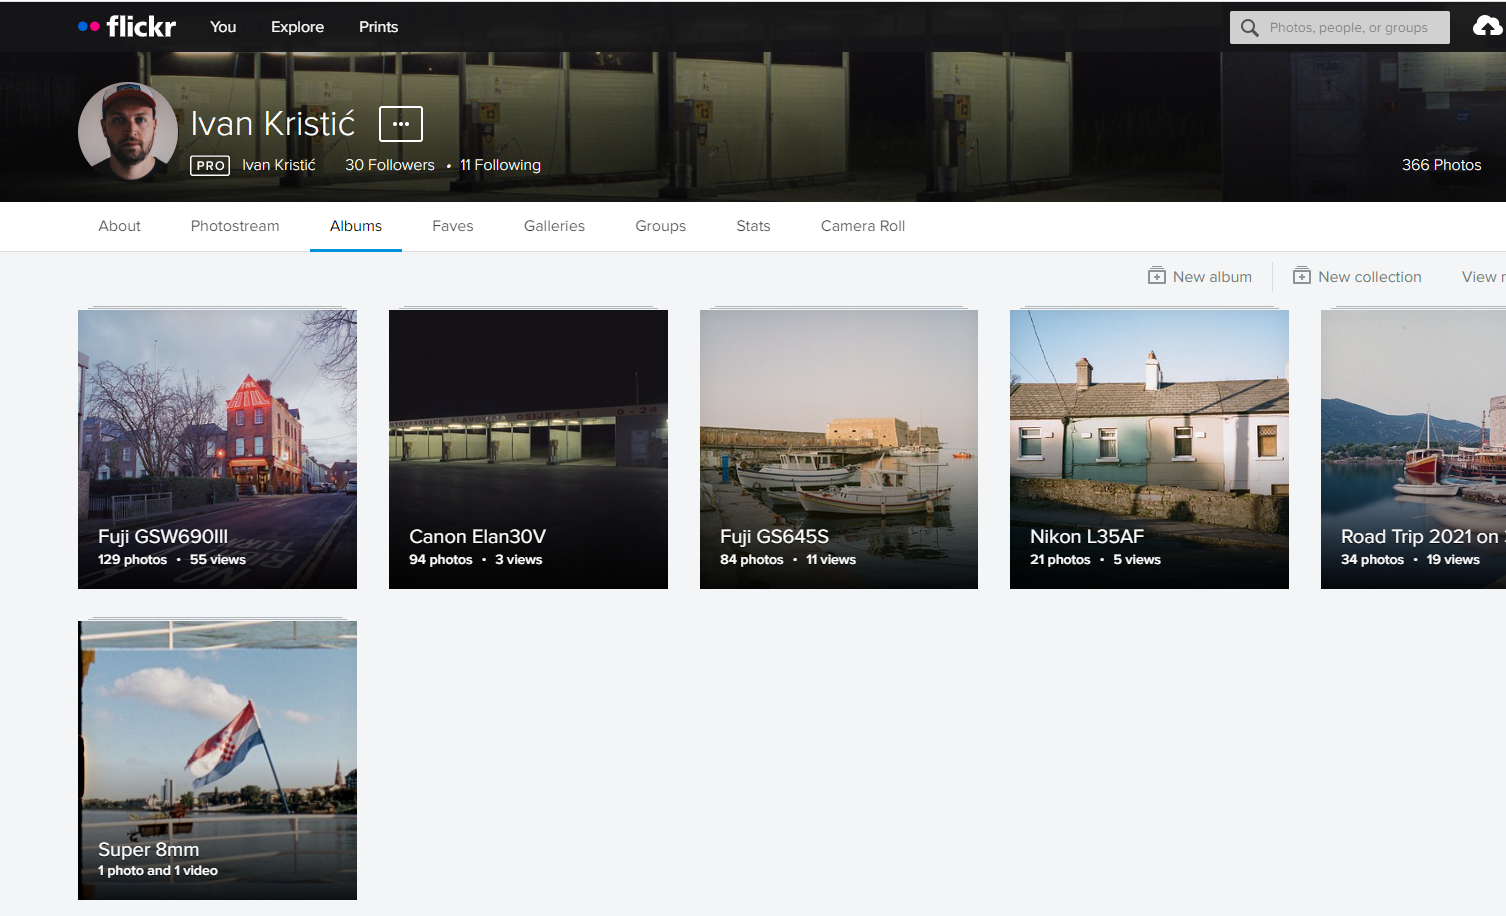 Flickr Albums interface showing photographer their albums 